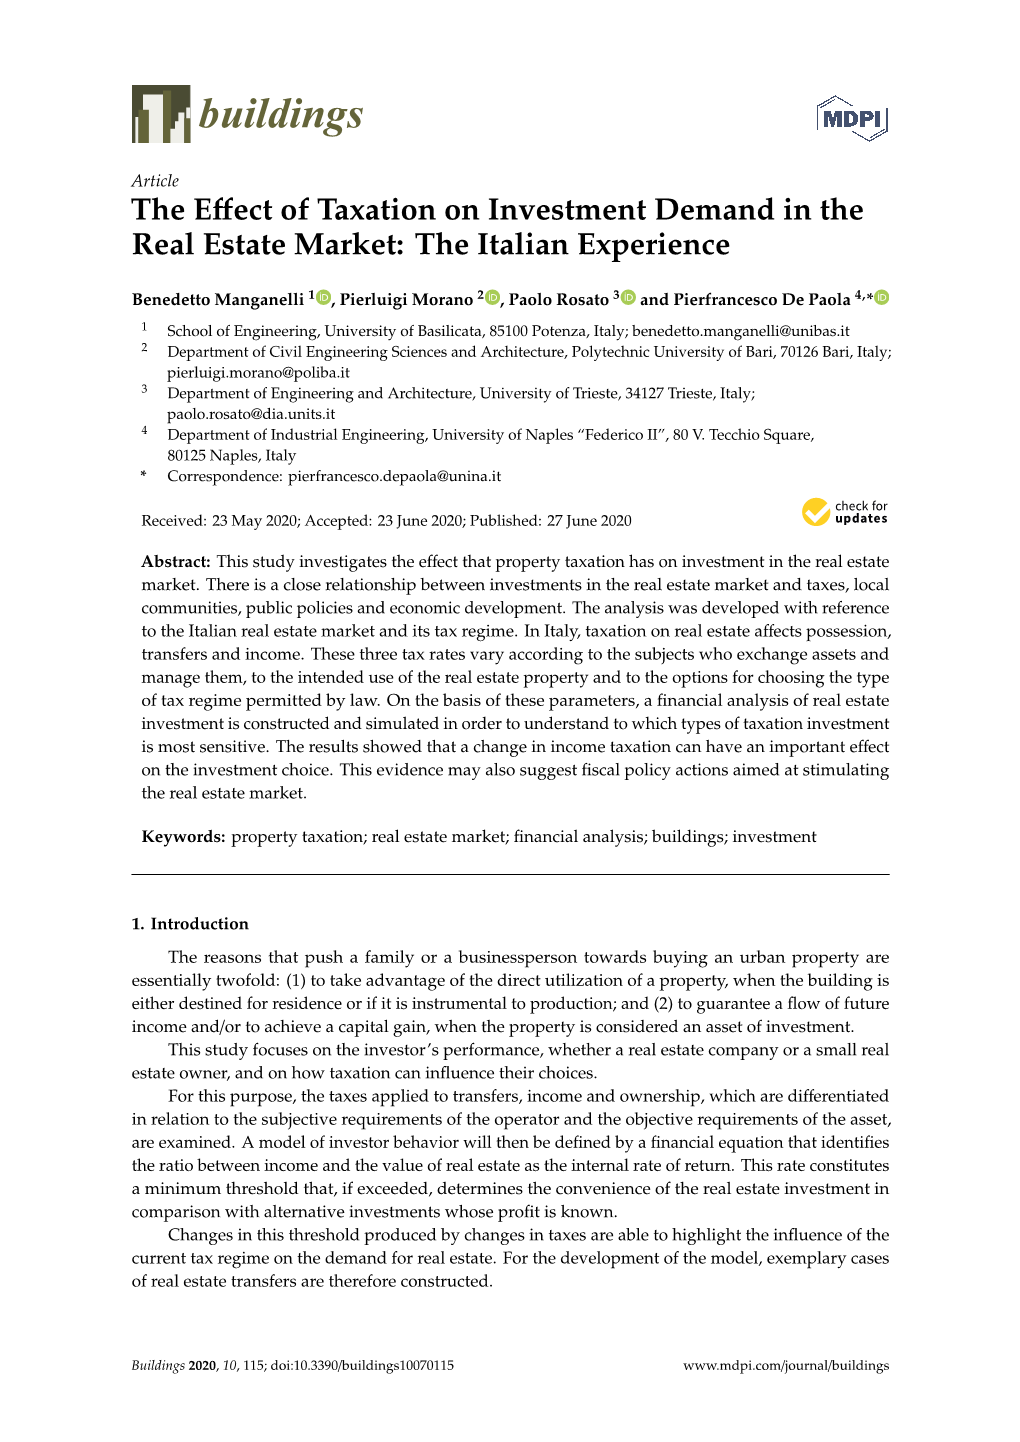 The Effect of Taxation on Investment Demand in the Real Estate